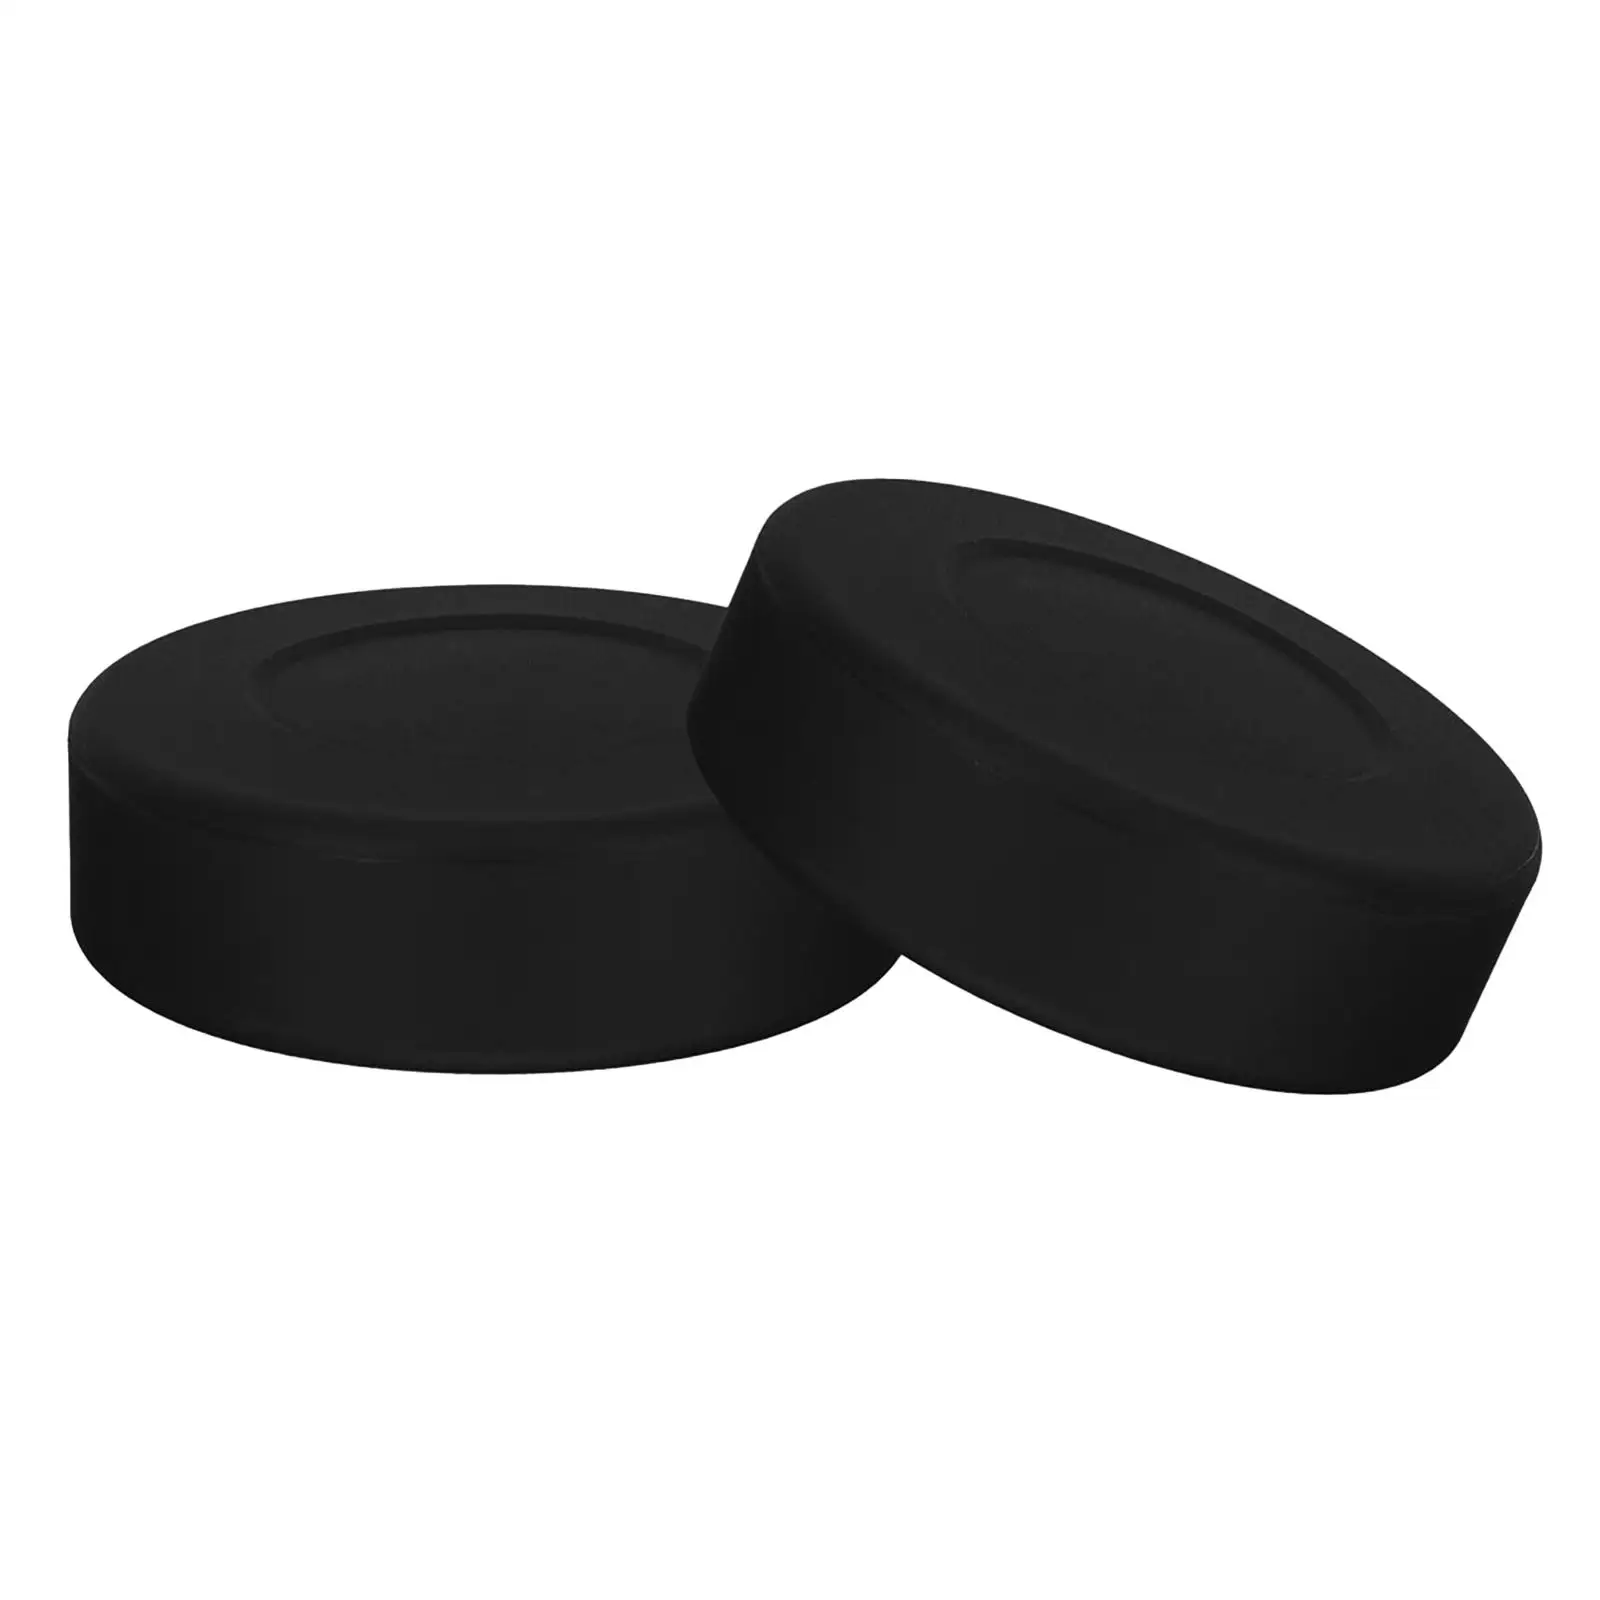 2 Pieces Ice Hockey Puck Multipurpose Sturdy Professional Hockey Ball for Kids Professionals Beginners Teenagers Competition